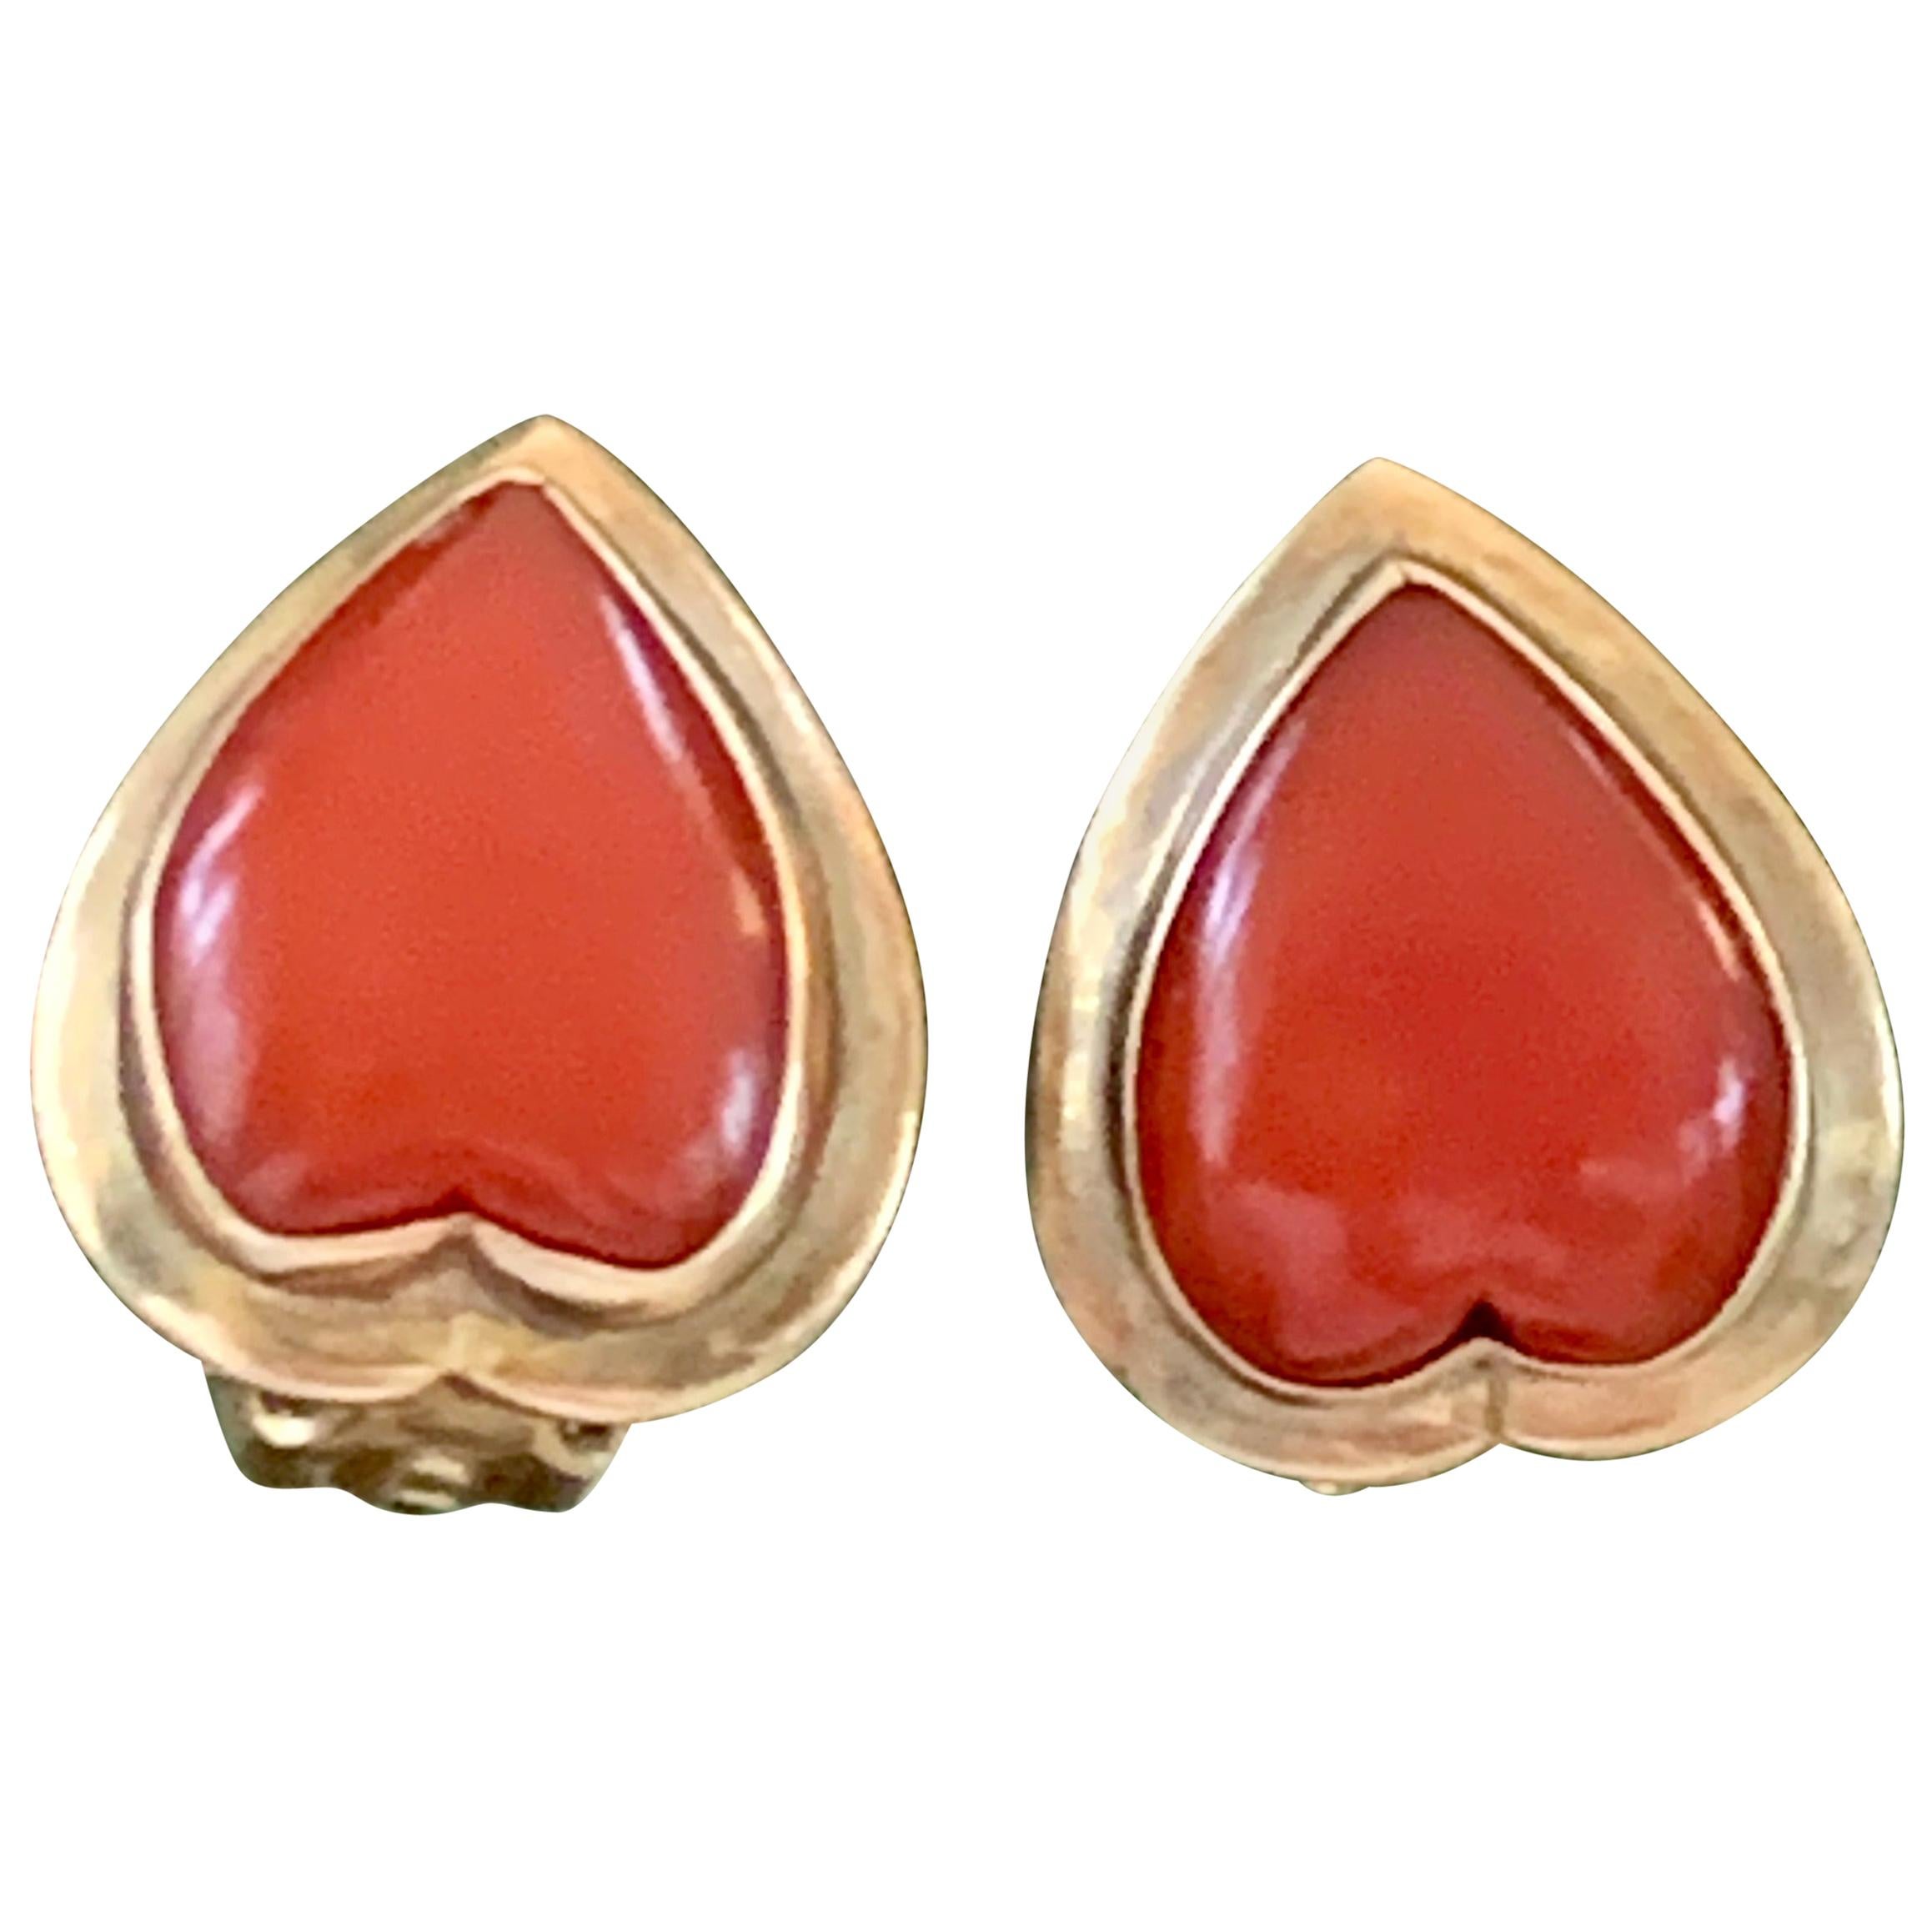 Ming's Signed Oxblood Coral Heart Cabochon 14 Karat Yellow Gold Clip-On Earrings